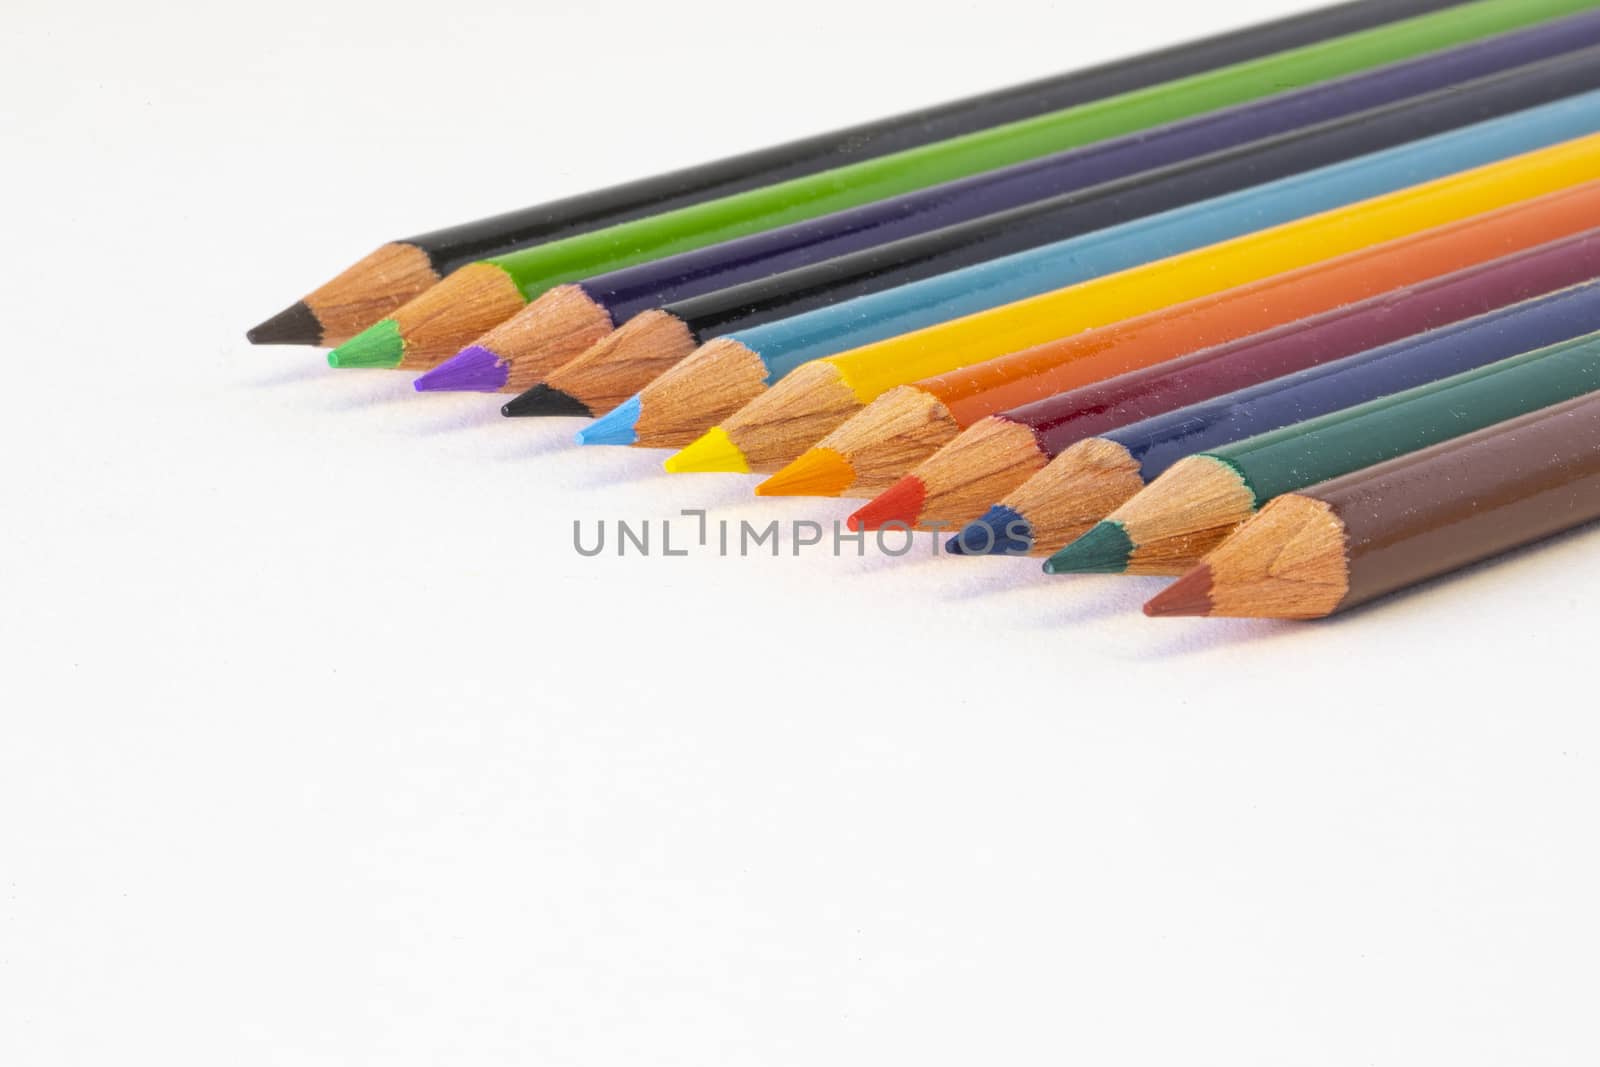 Colored Pencils in Focus by CharlieFloyd